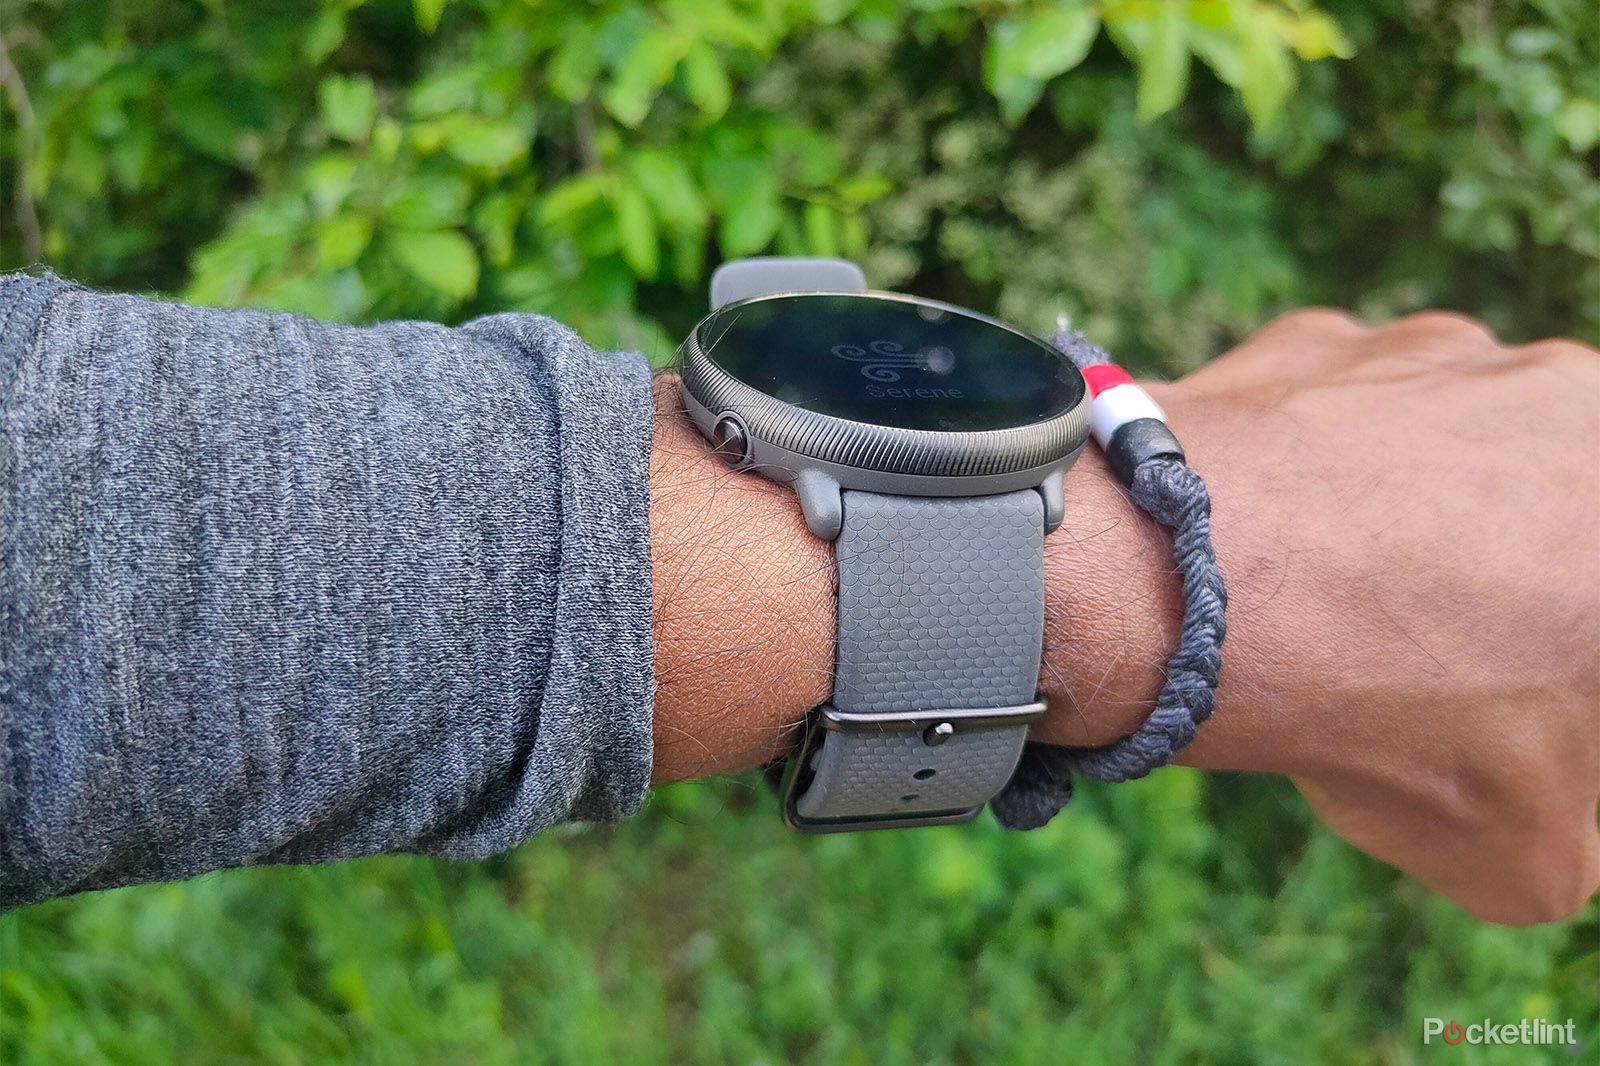 Polar Ignite 2 review: a decent fitness watch with robust training